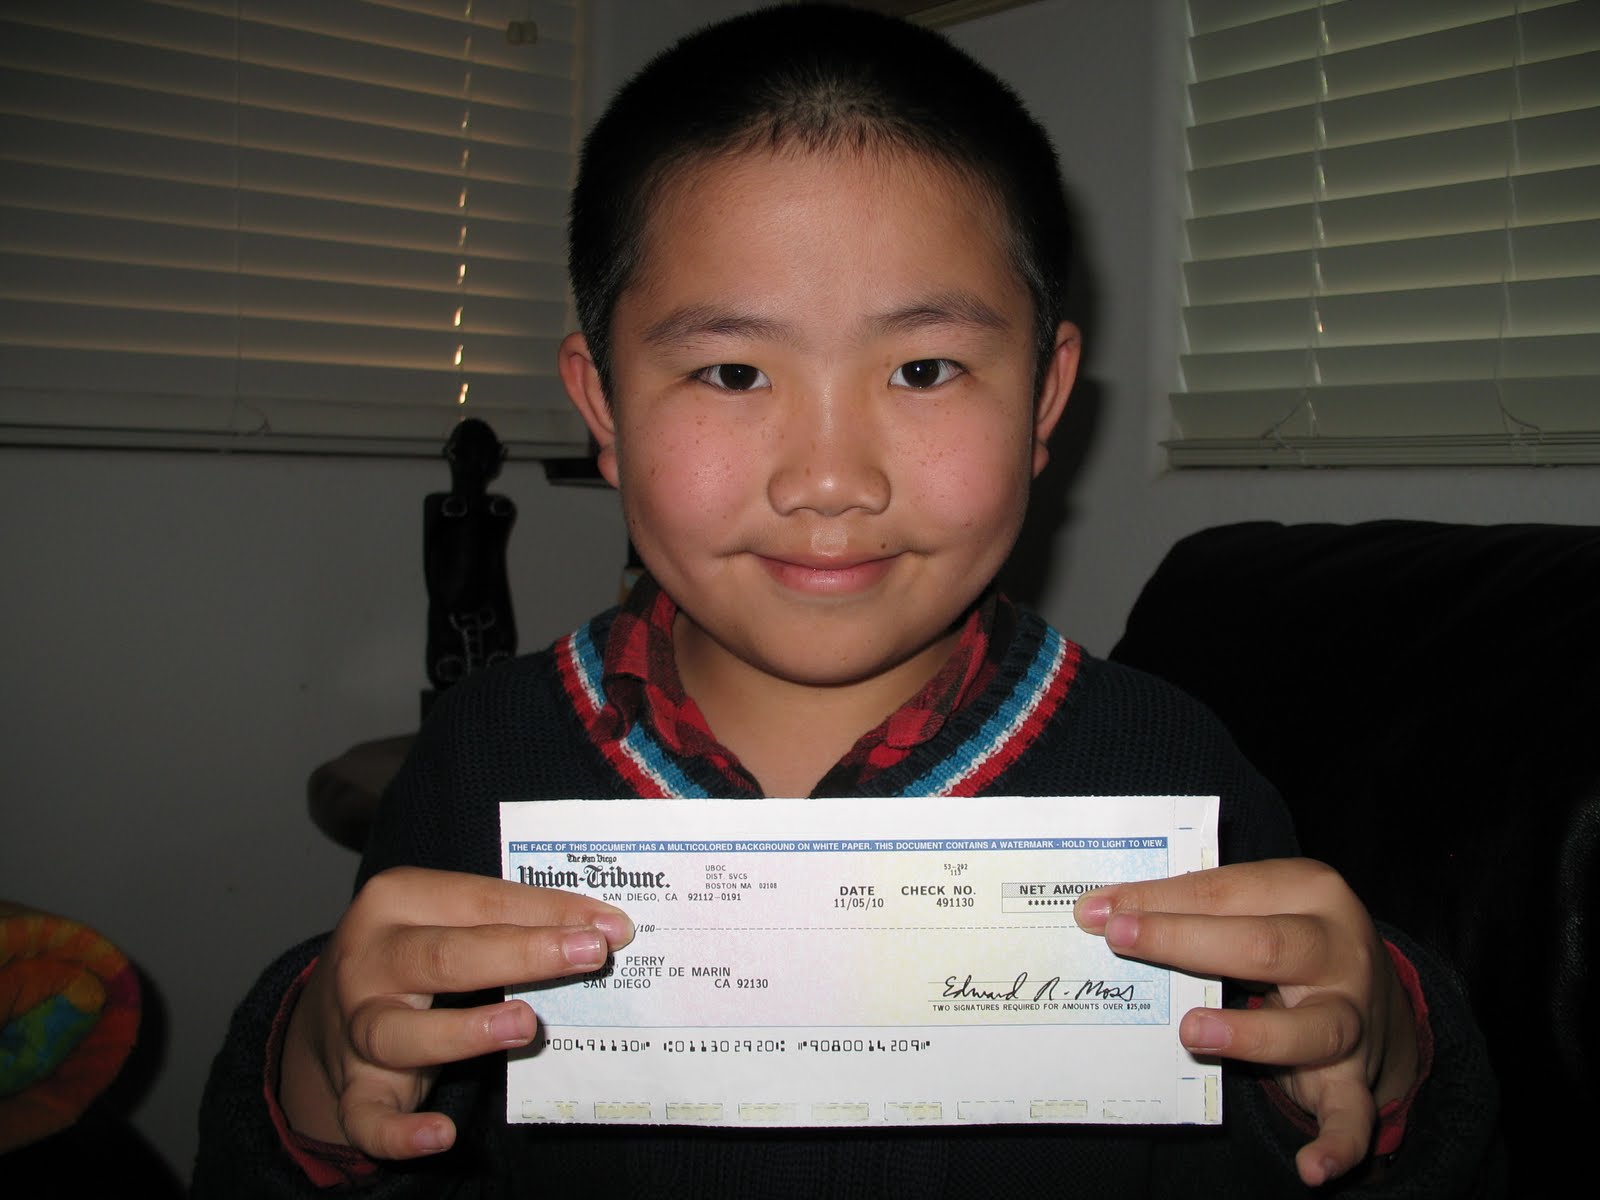 CaVe BoOk: 11 year old kid makes 100,000 Dollars WoW